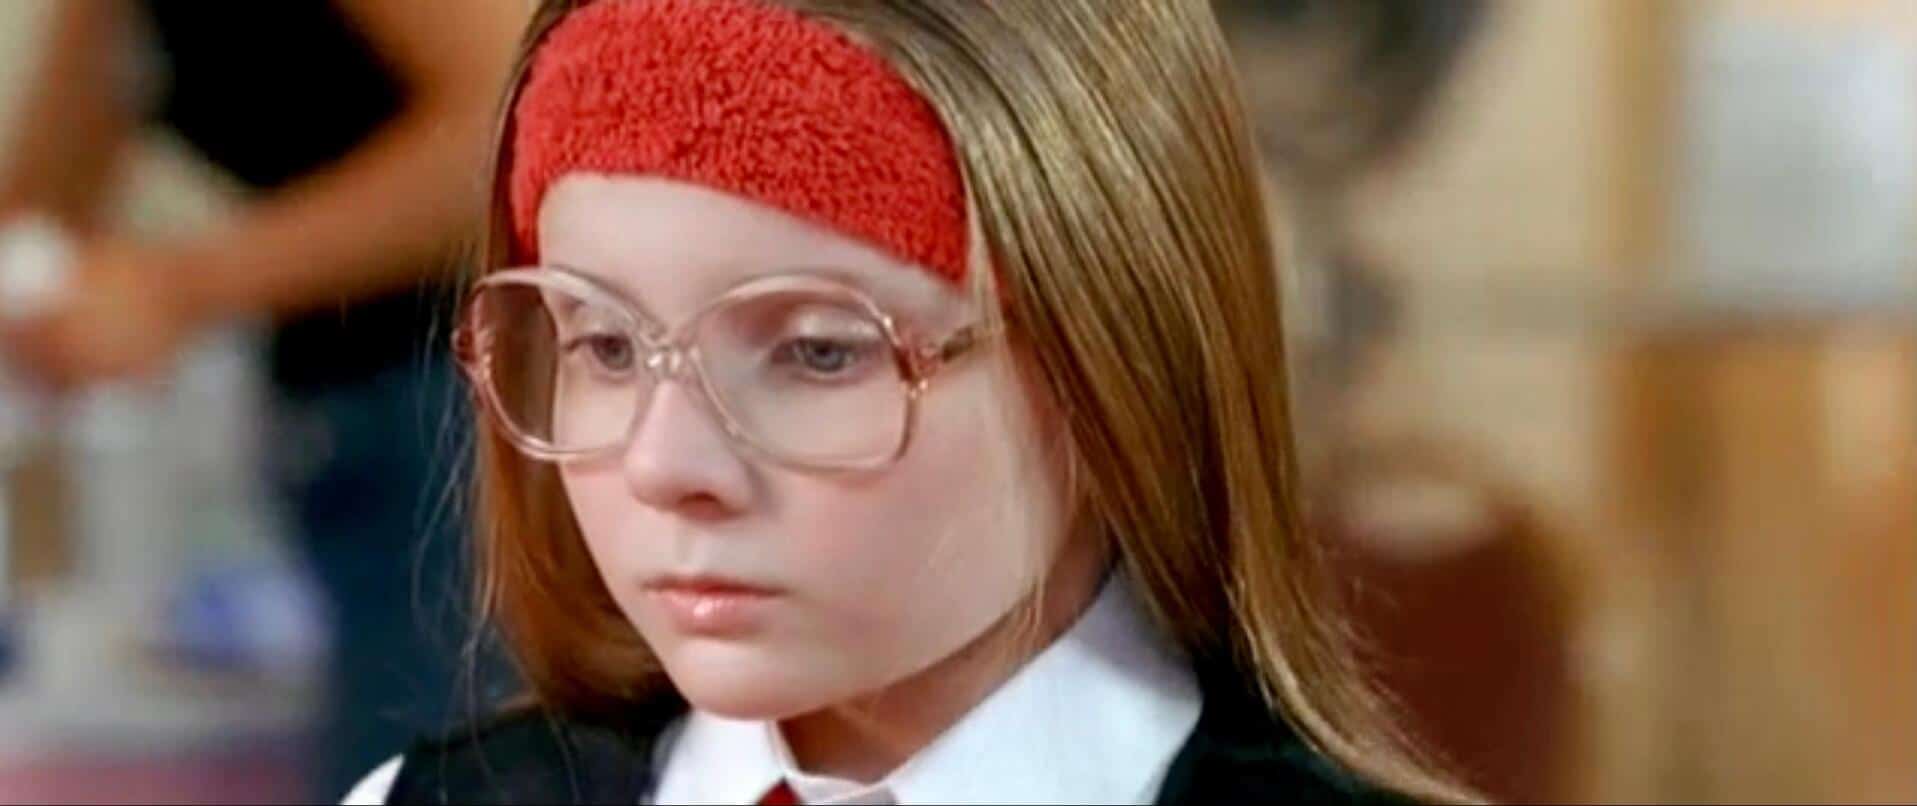 A young girl wearing glasses looks down in this image from Big Beach Films.